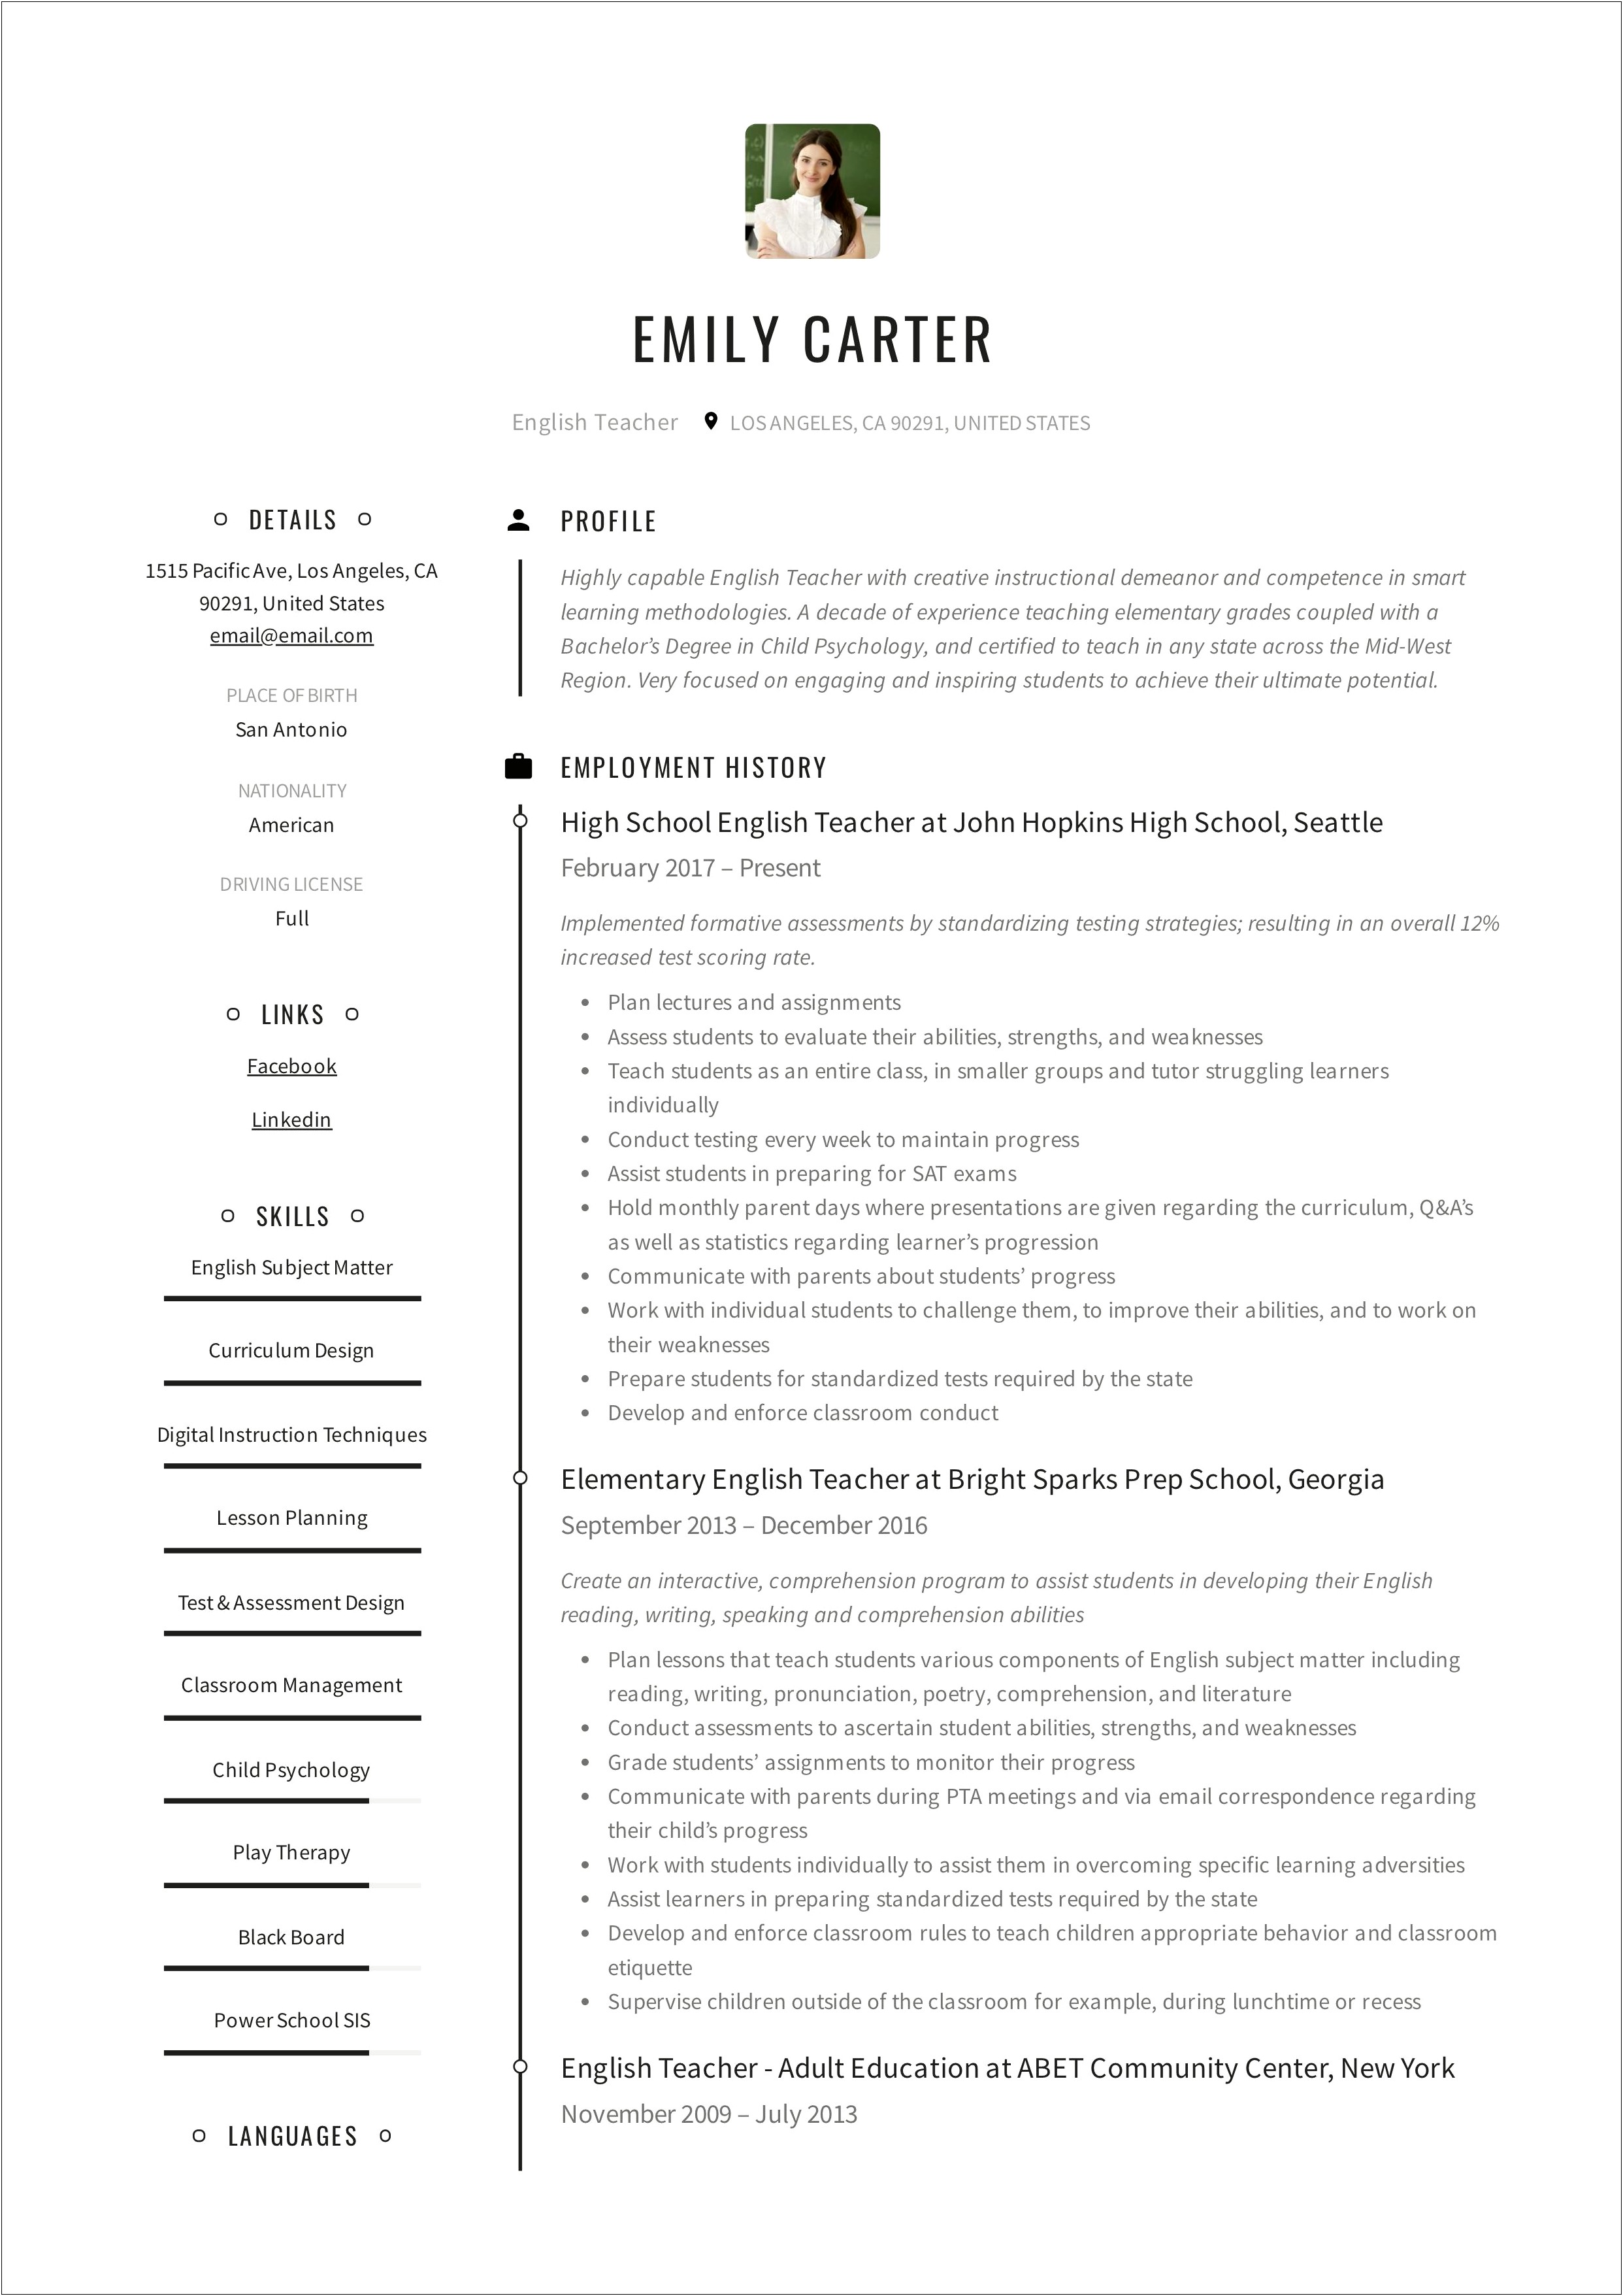 Resume Better In Pdf Or Word